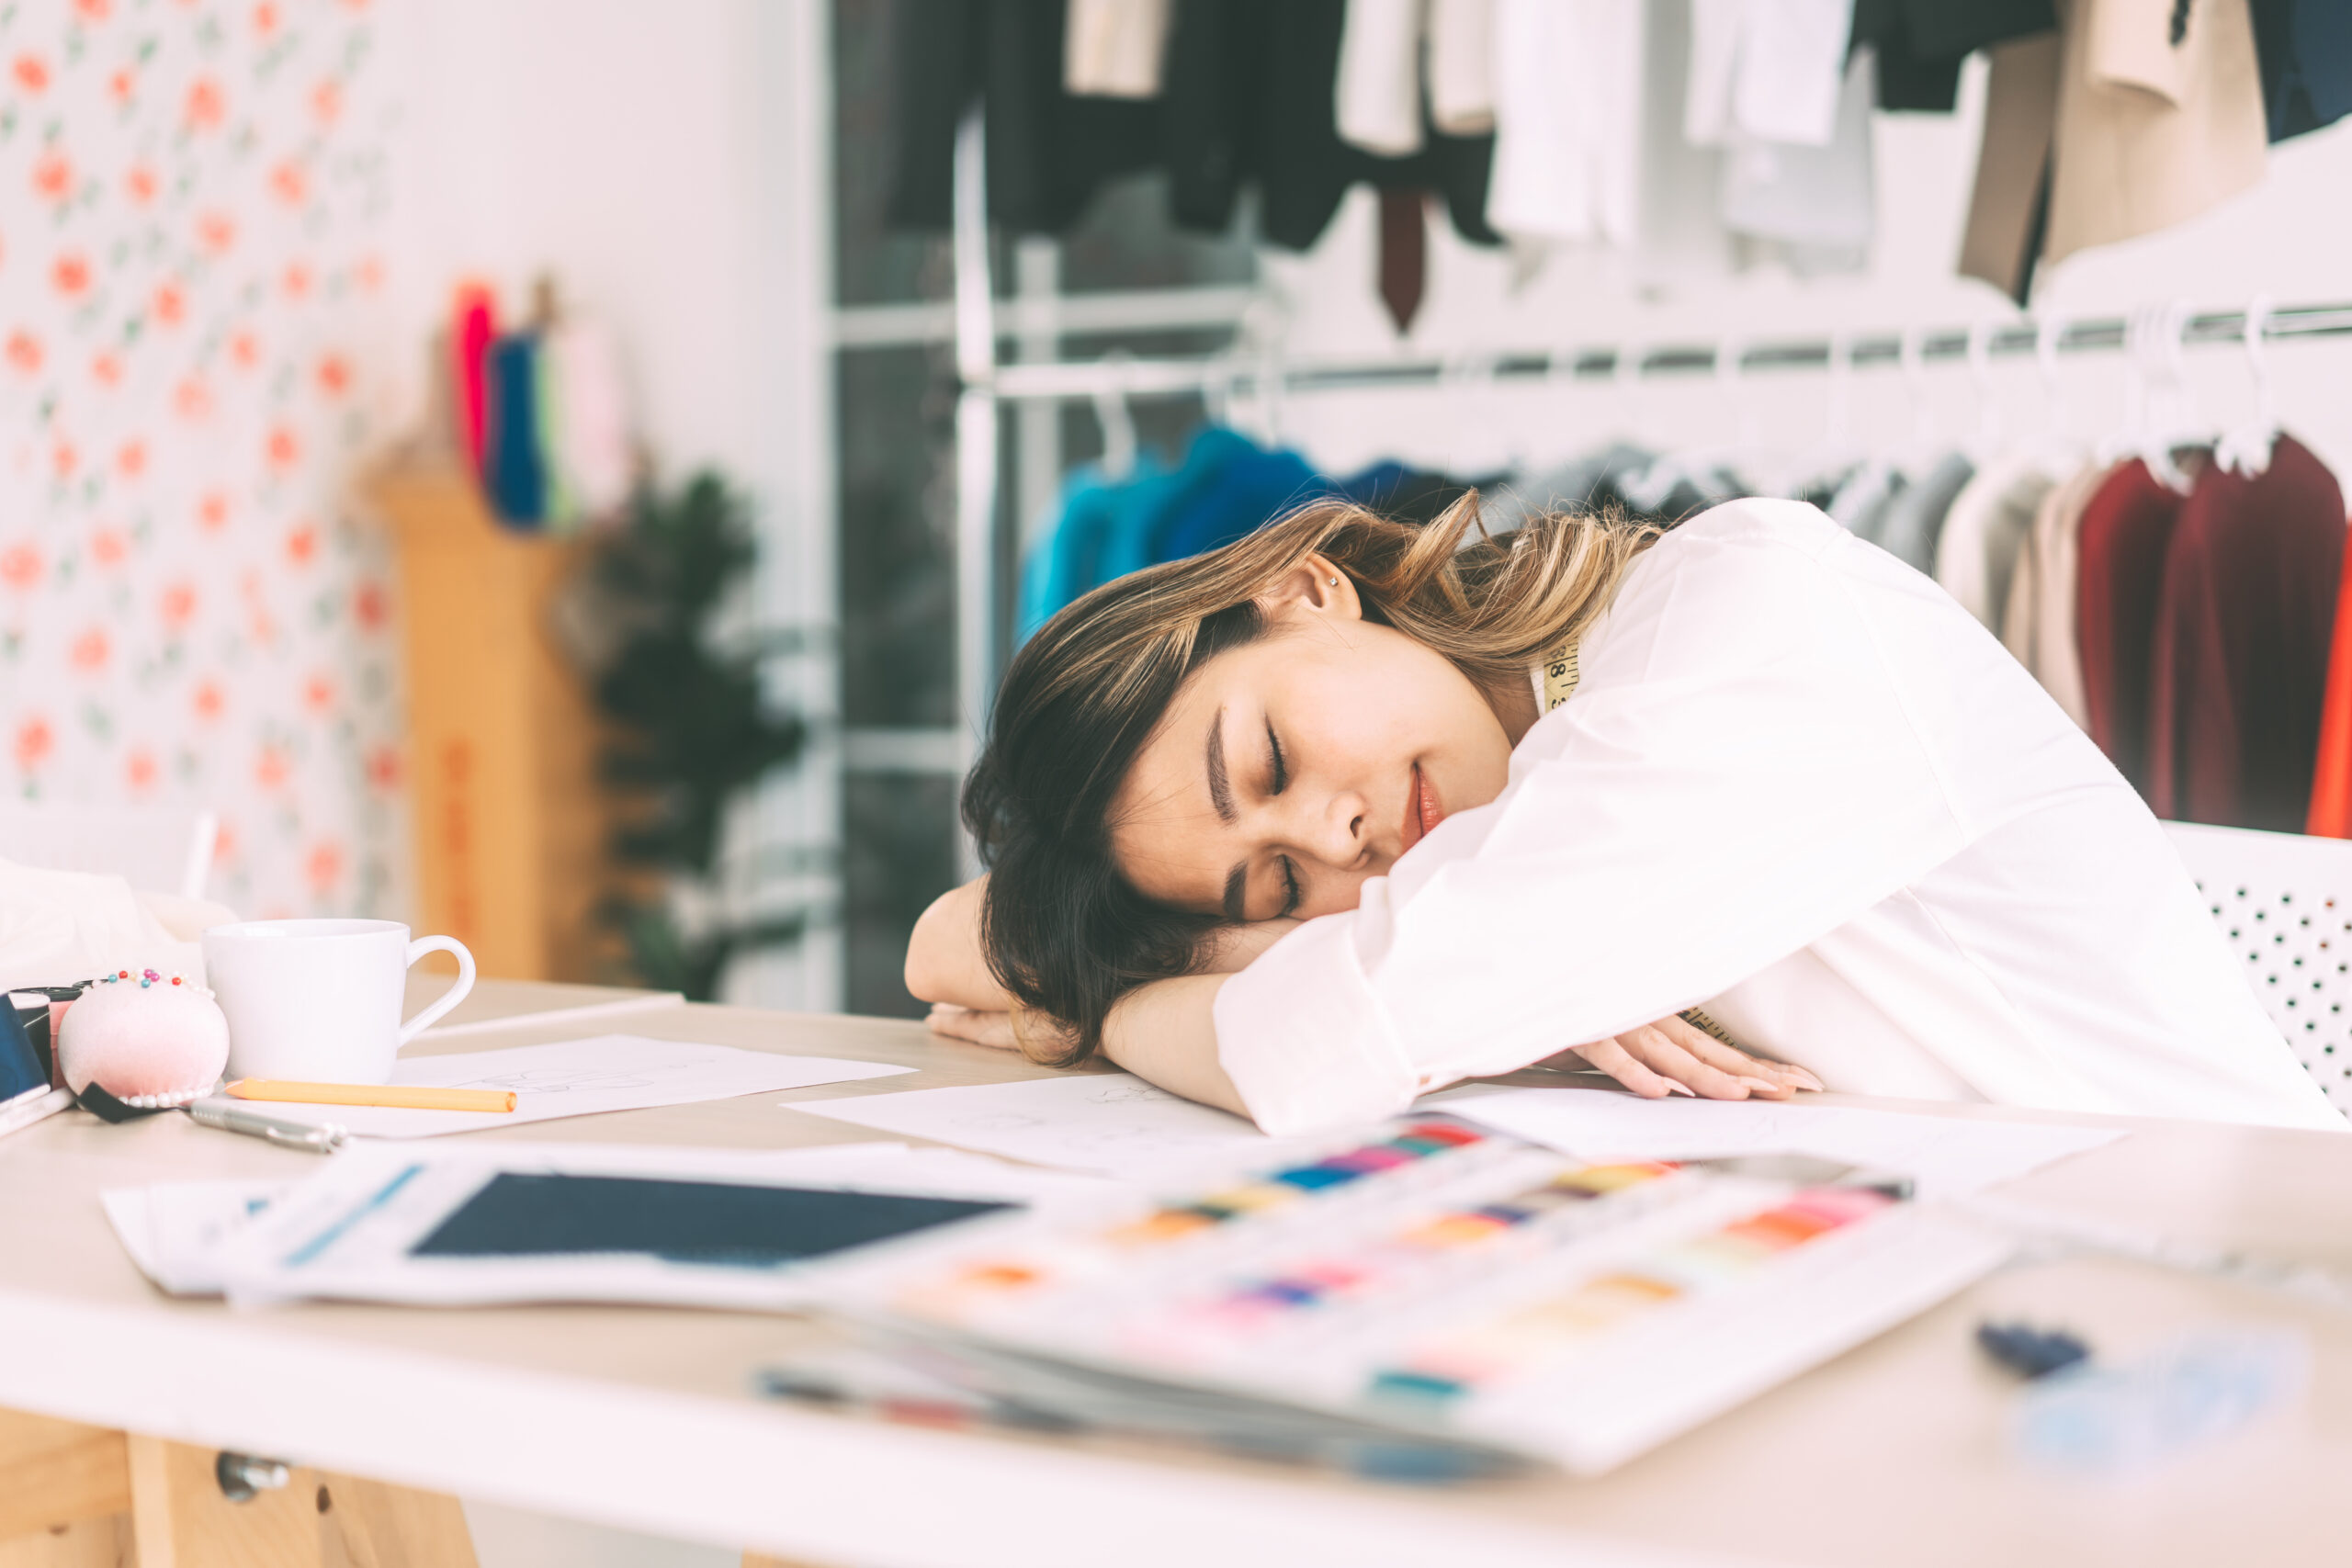 Can We Truly Recover From Sleep Debt?